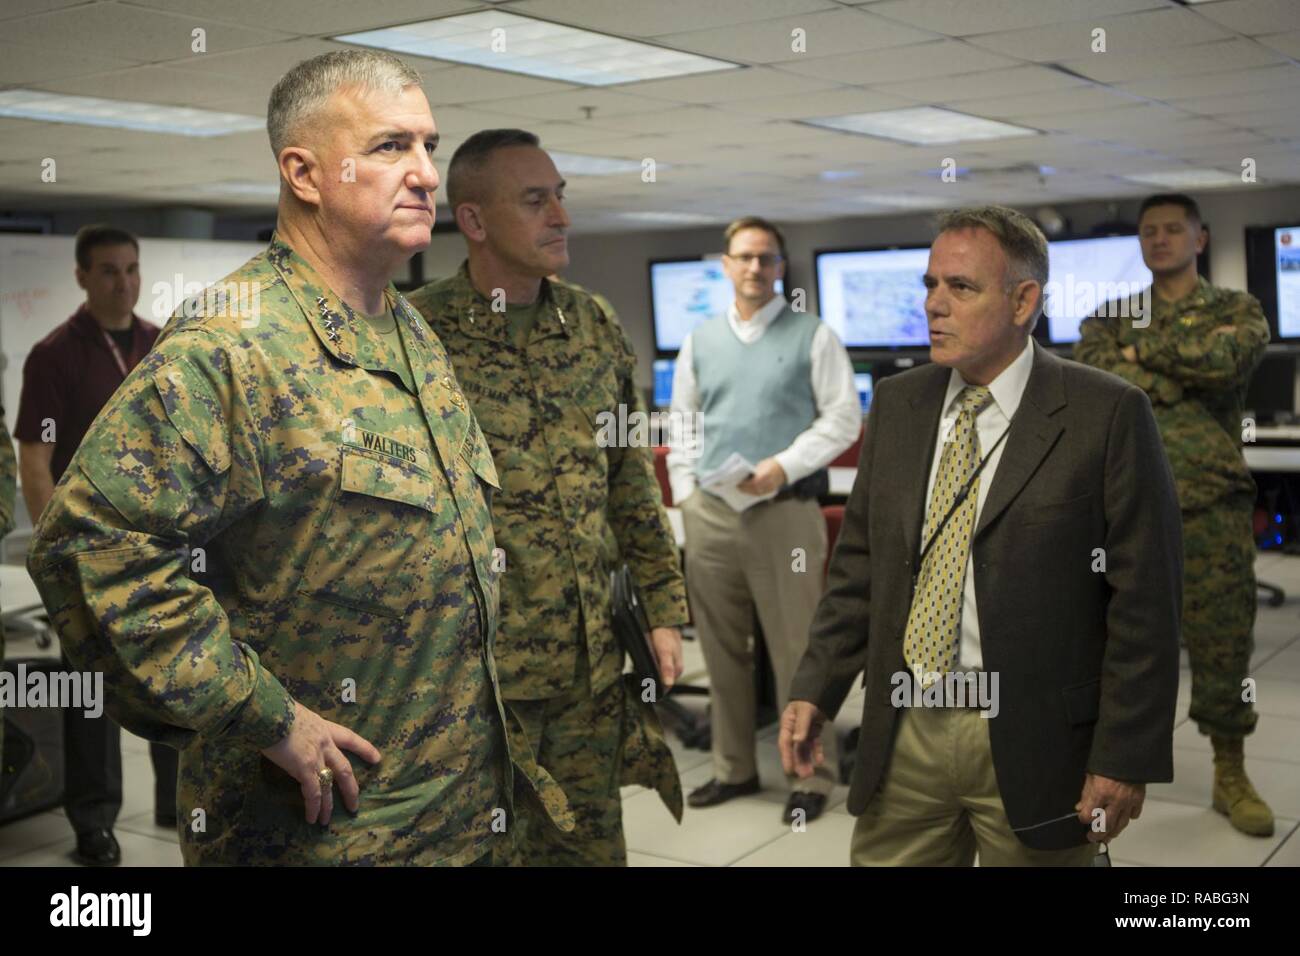 U.S. Marine Corps Gen. Glenn Walters, left, Assistant Commandant of the Marine Corps, speaks with Joe Purcell, director of Training Support Division, Marine Corps Installations-East, in regards to simulator training systems during a visit to Camp Lejeune, N.C., Jan. 26, 2017. The purpose of the visit was to increase awareness and capabilities of ground simulation and simulator training systems in support of operational forces combat readiness. Stock Photo